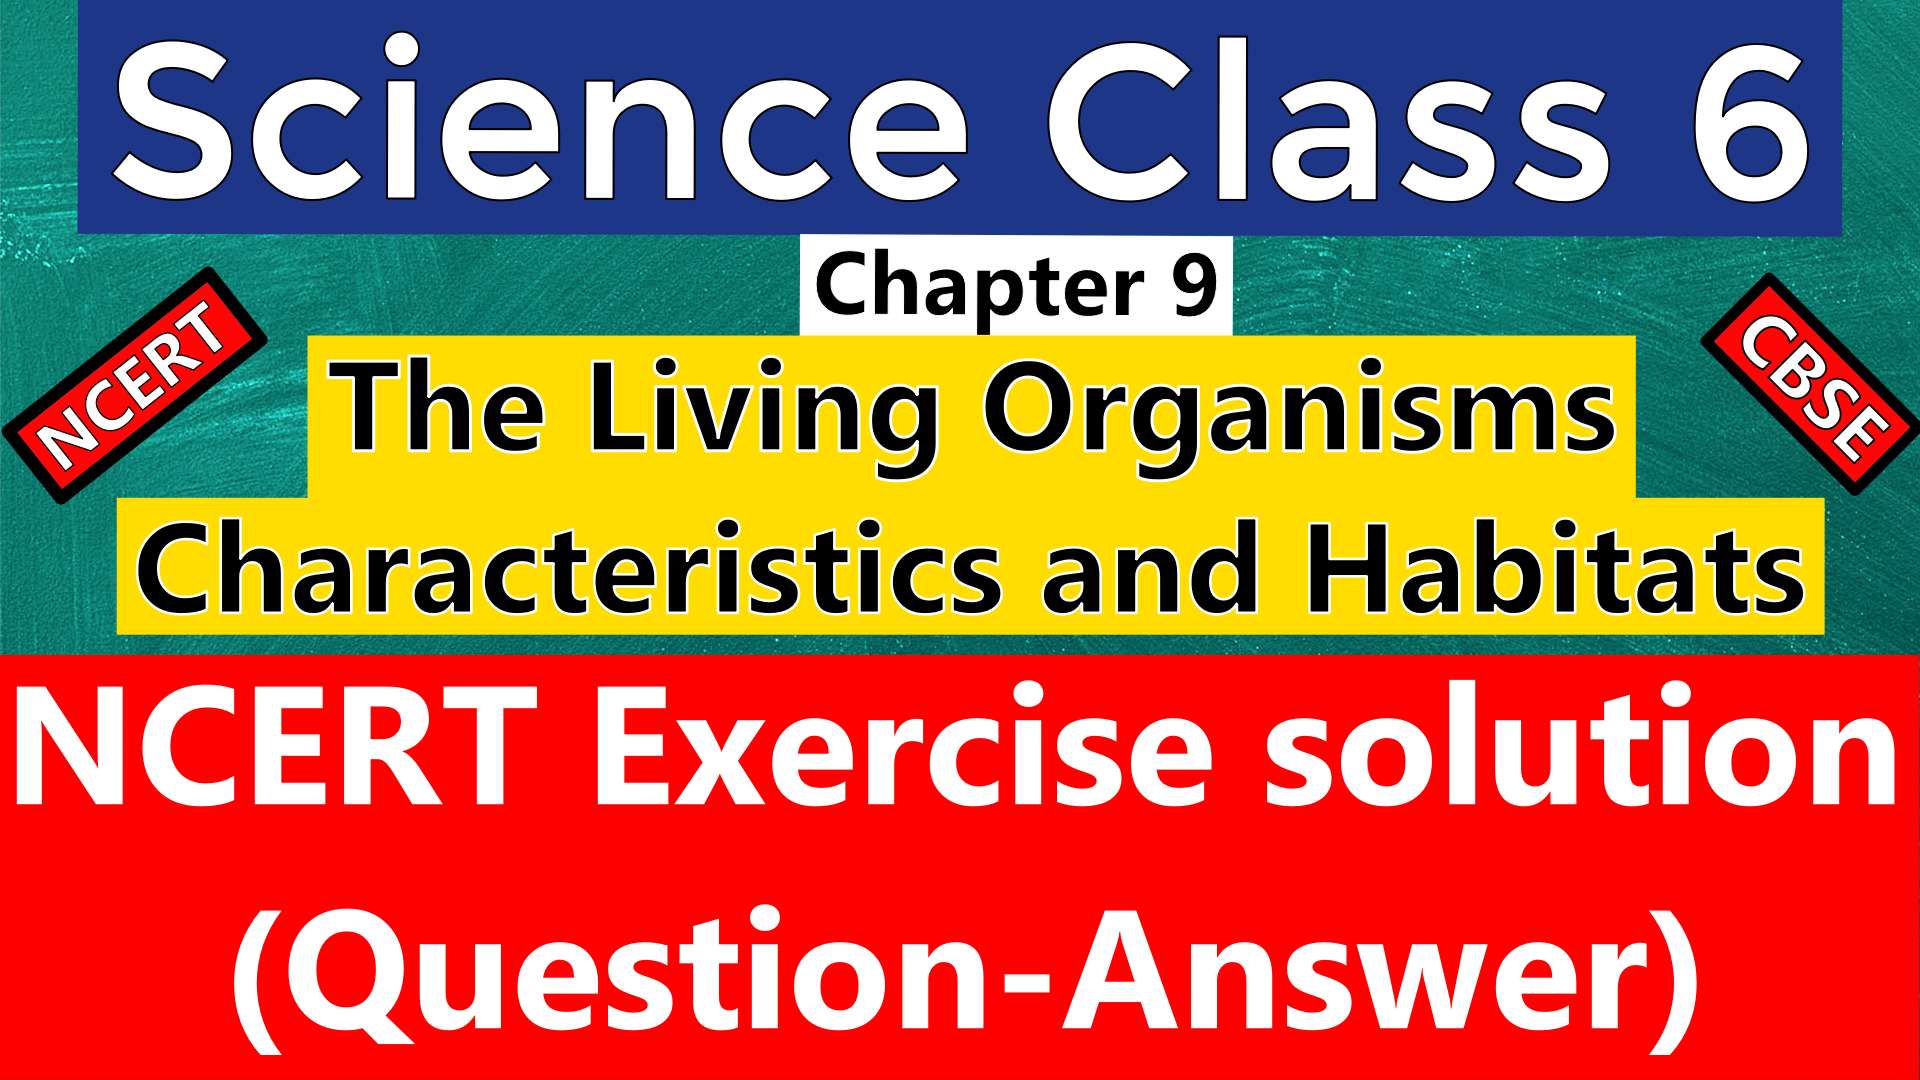 Science Class 6 – Chapter 9 -The Living Organisms Characteristics and Habitats- NCERT Exercise Solutions (Question-Answer)